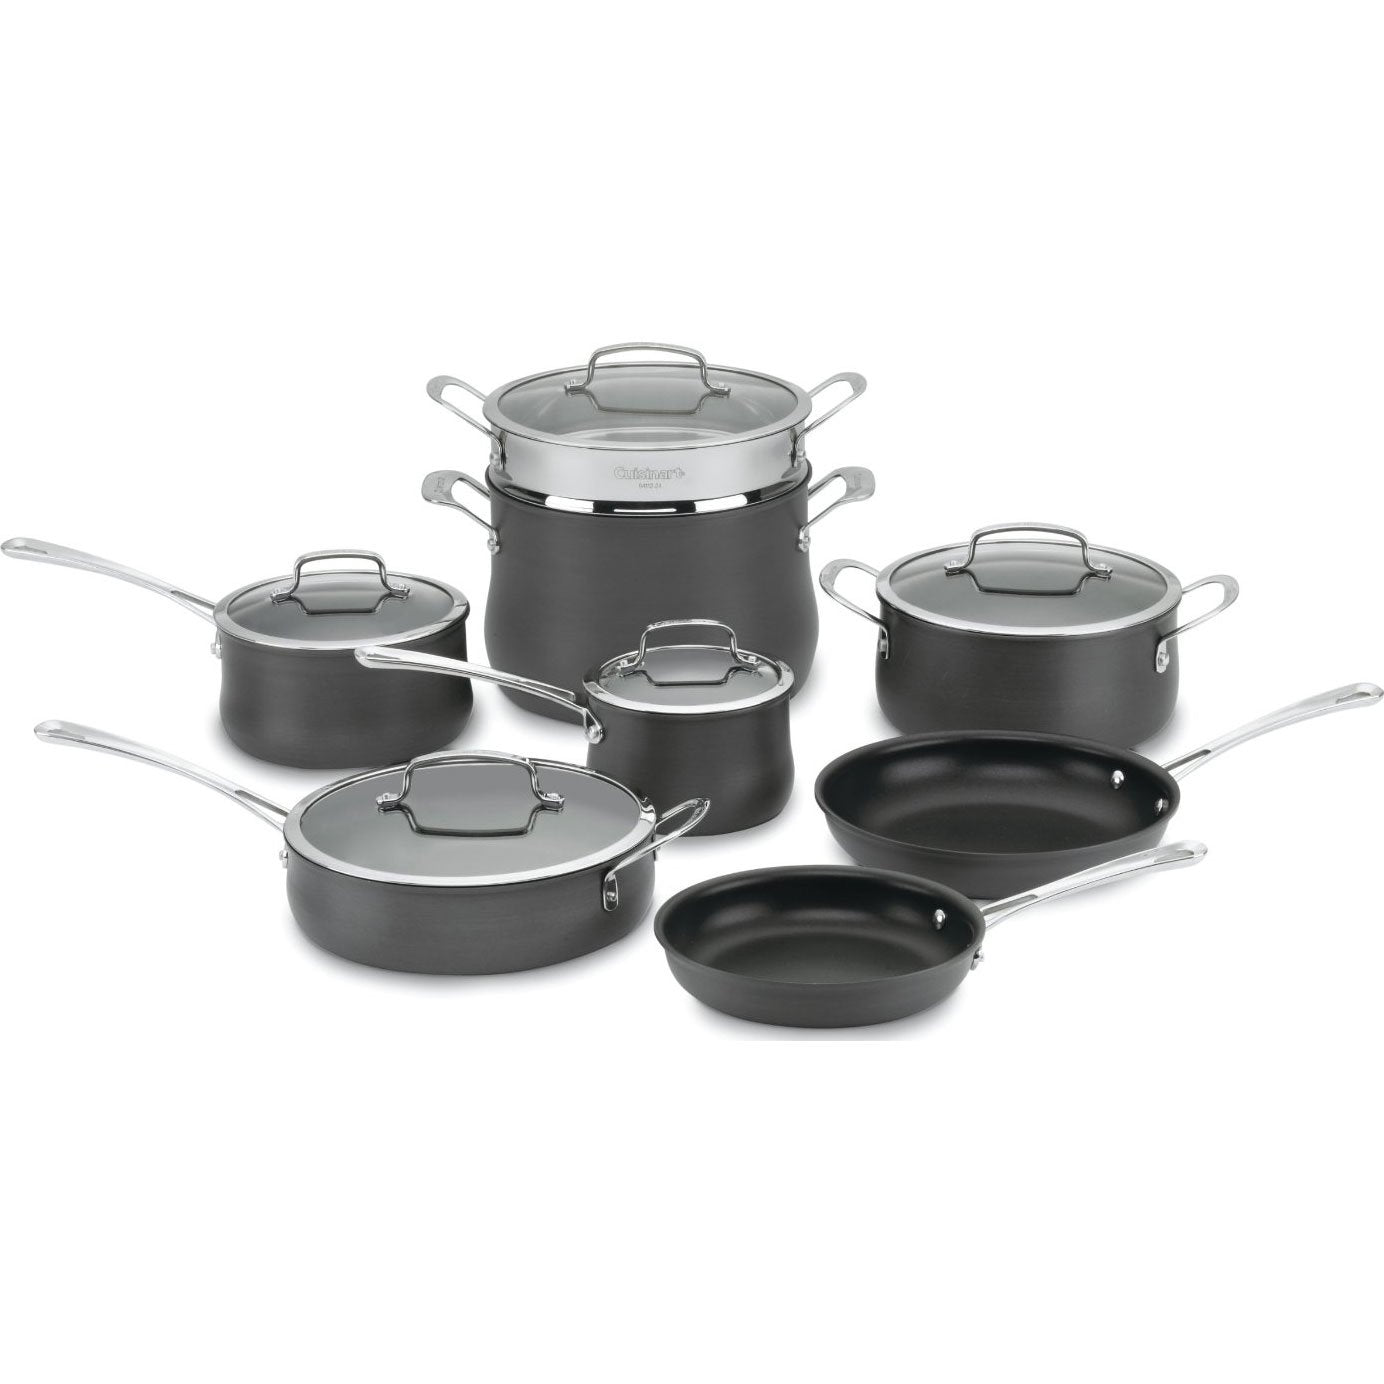 Cuisinart 64-13 13-Piece Hard Anodized Contour-Stainless-Steel, Cookware Set